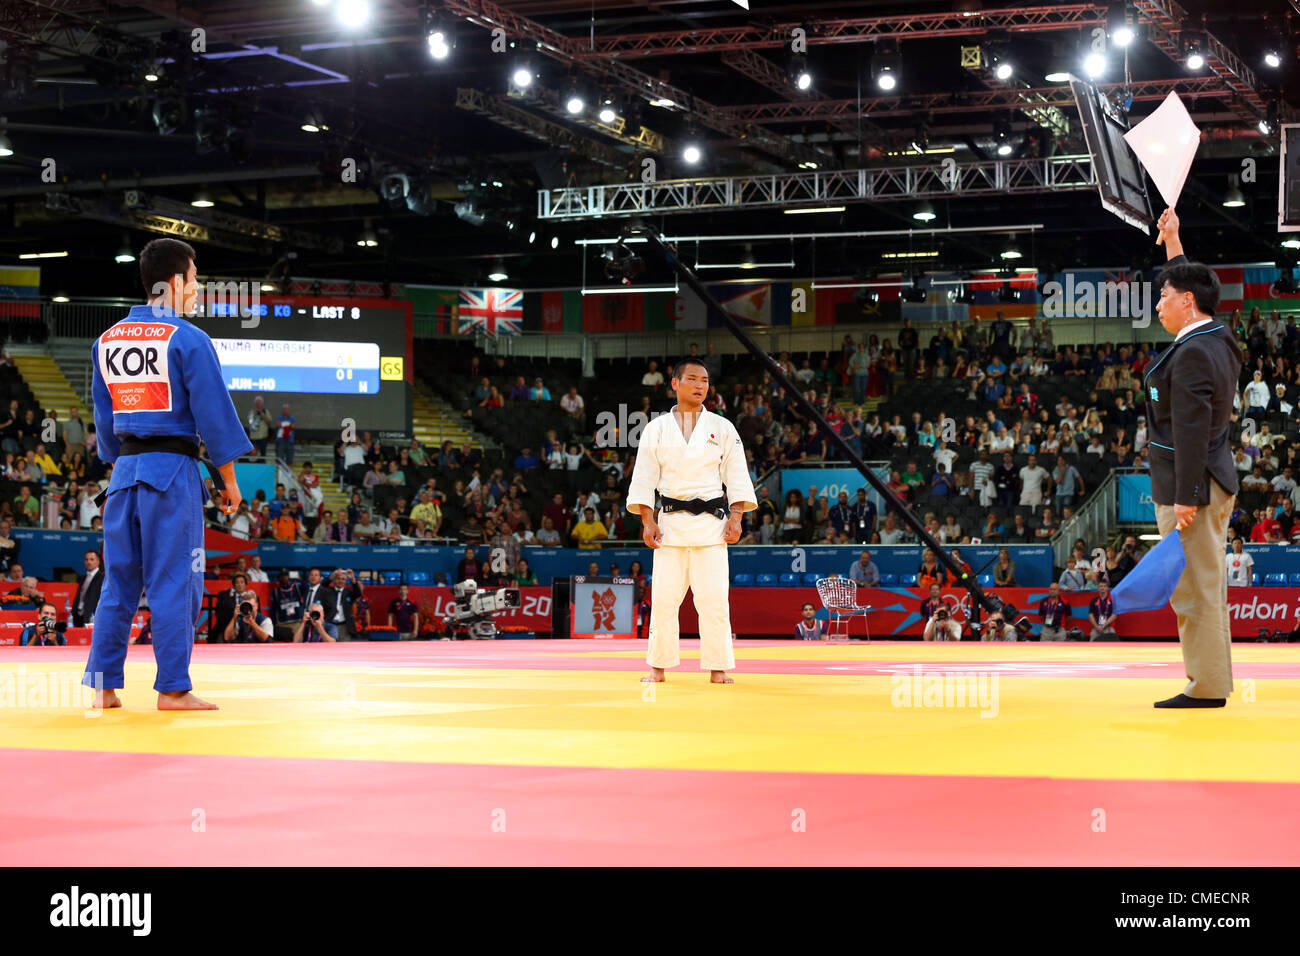 (L to R) Cho Jun Ho (KOR), Masashi Ebinuma (JPN),  JULY 29, 2012 - Judo :  Men's -66kg Quarter-final  at ExCeL  during the London 2012 Olympic Games The match ended with bizarre scenes as originally the three judges on the mat all rose blue flags to designate Cho as the winner. This resulted in booing from the crowd and the International Judo Federation's Refeering Commission called over the three judges to speak with them. They then returned to the mat and all three raised white flags to designate Ebinuma as the winner. Both judokas later ended up taking the two bronze medals available in the Stock Photo